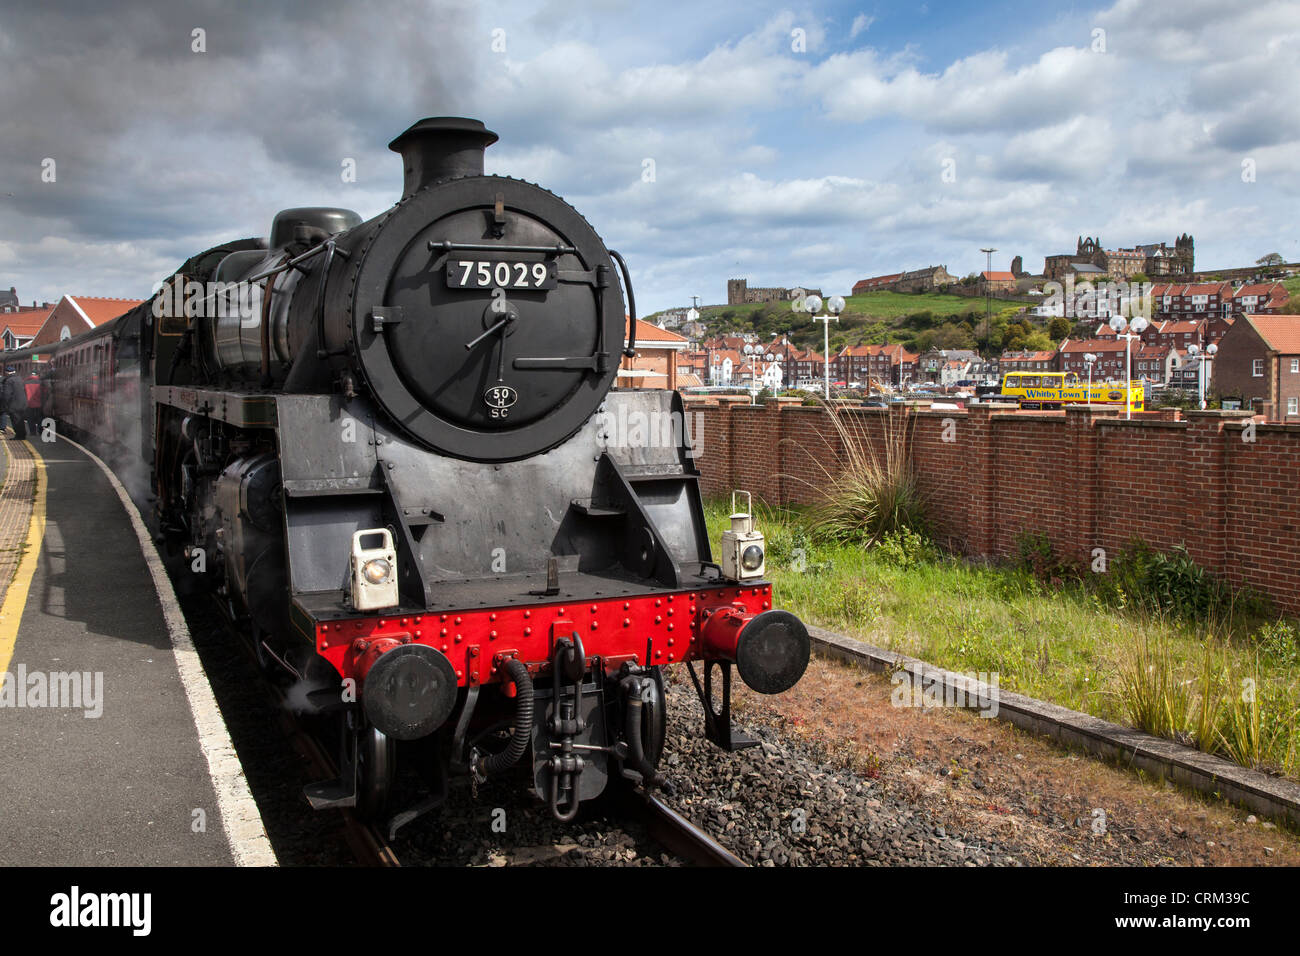 BR Classe Standard 4MT n. 75029 motore a vapore a Whitby, North York Moors Railway Foto Stock